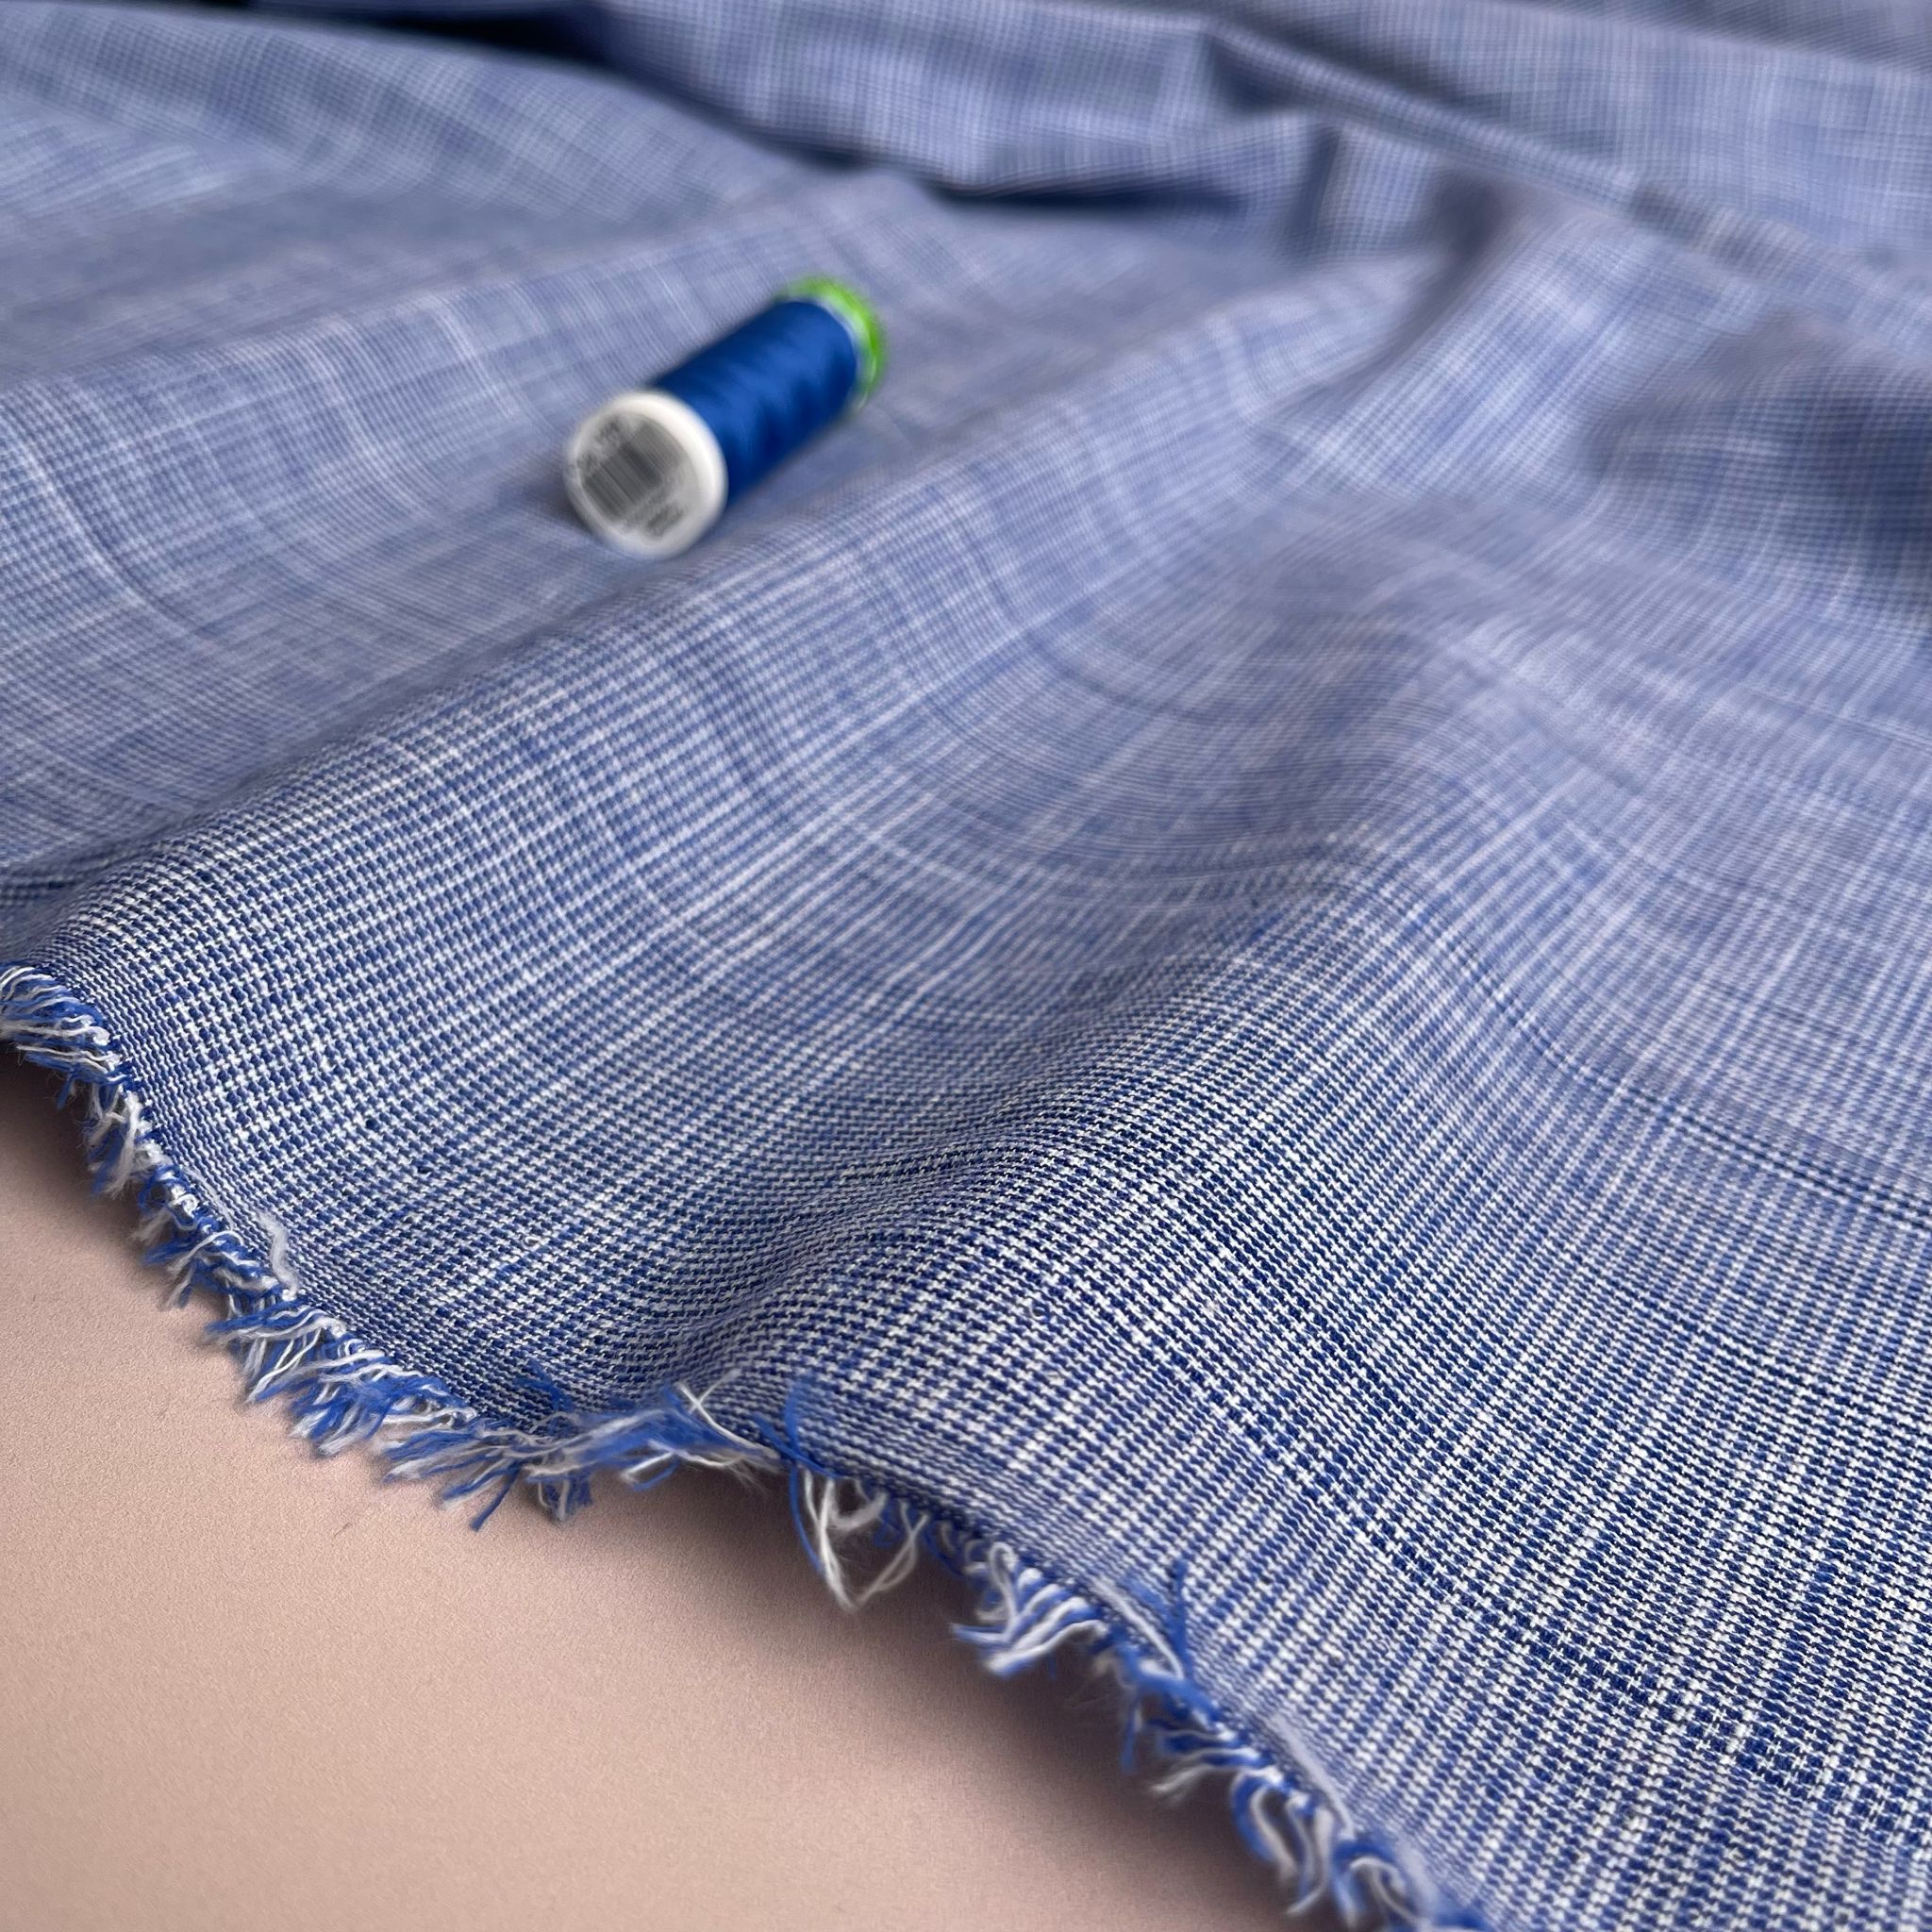 REMNANT 0.84 Metres - Yarn Dyed Blue Puppytooth Weave Cotton Fabric